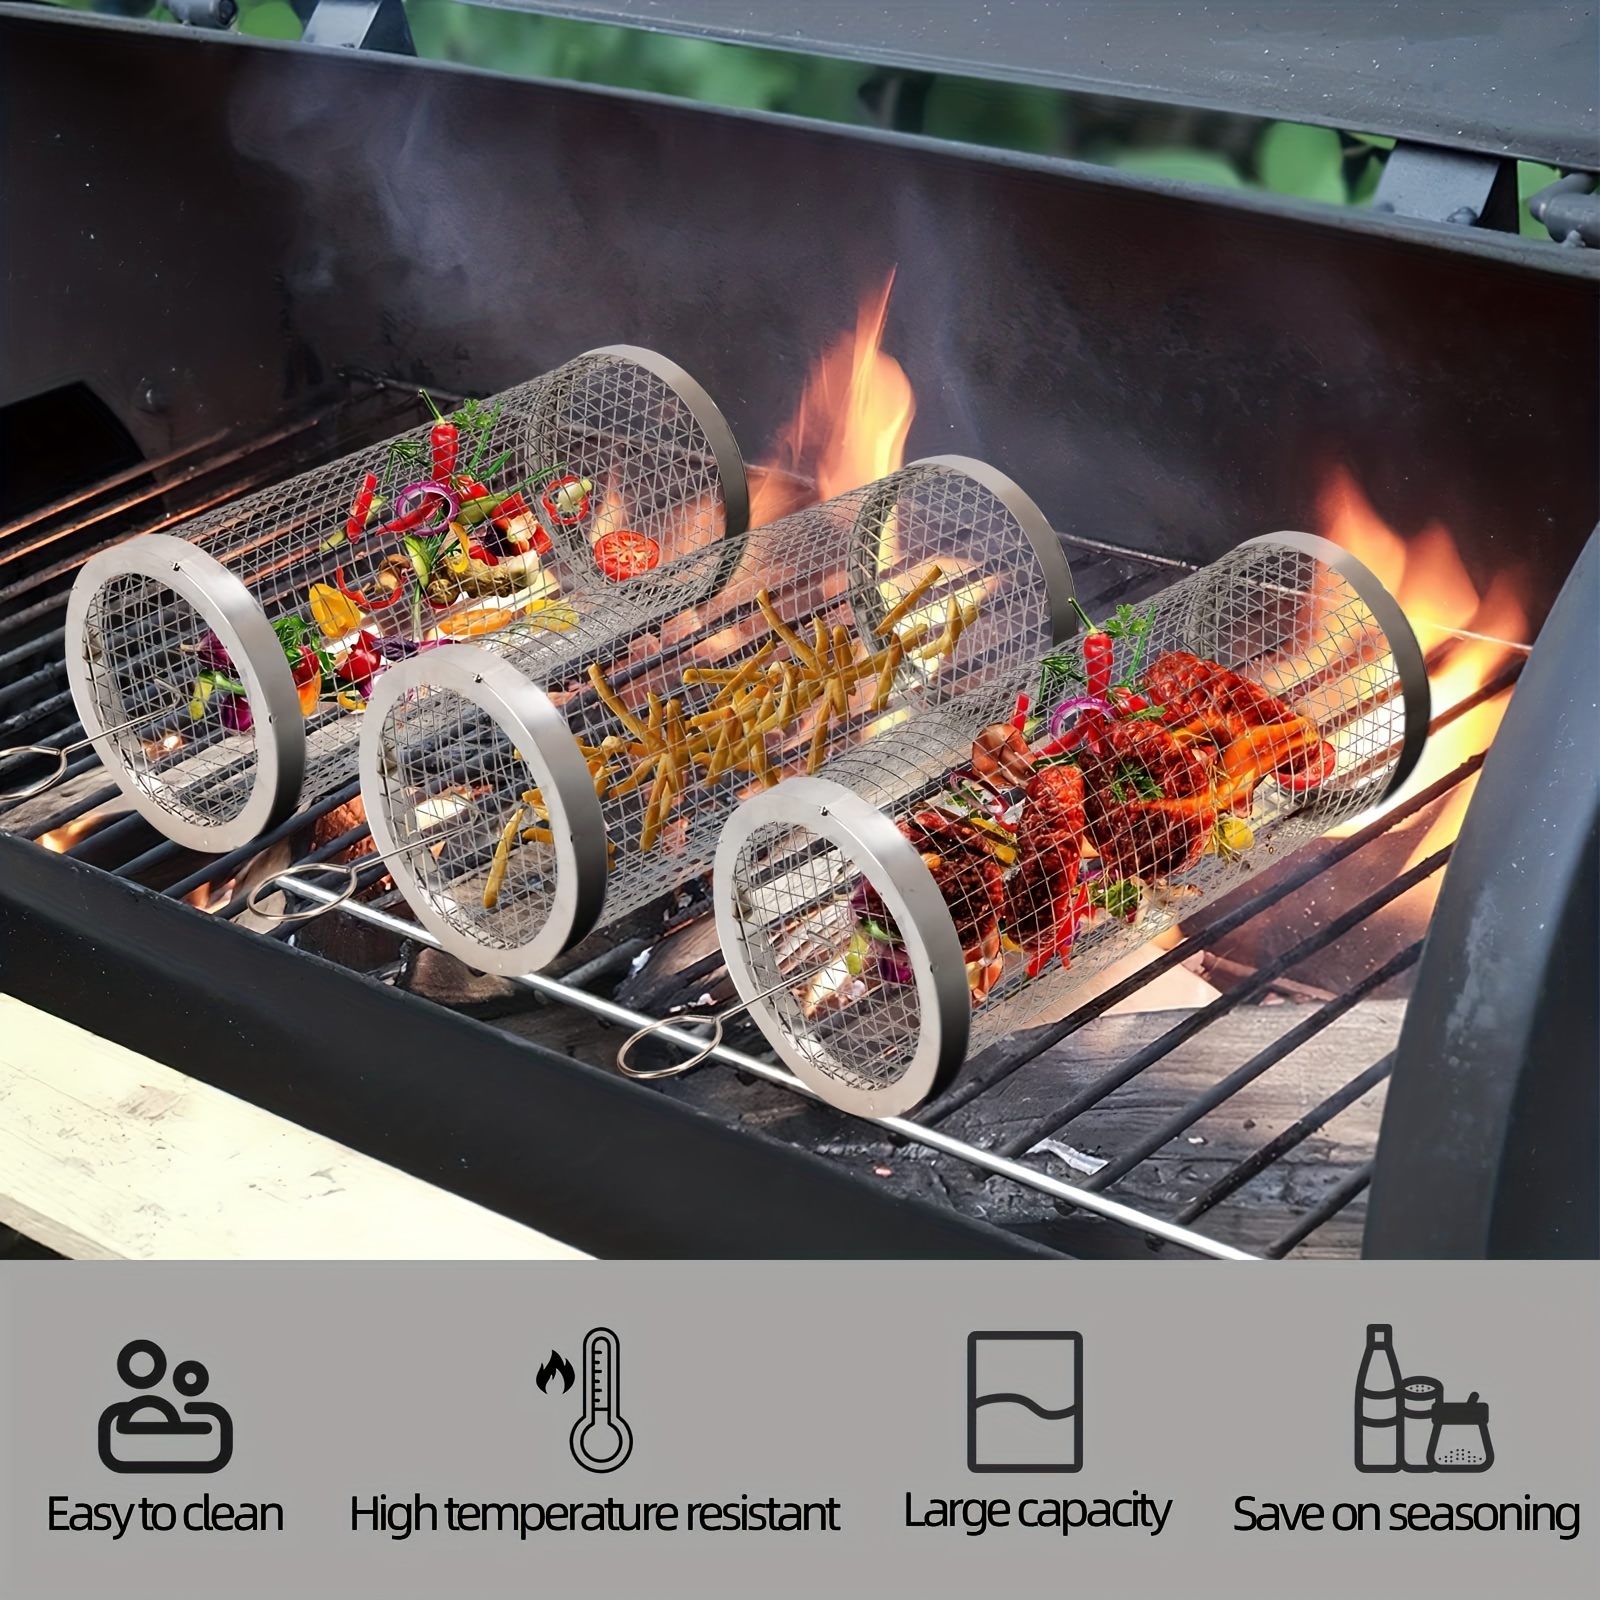 Grill Basket 2 PCS Rolling Grilling Baskets for Outdoor Grilling